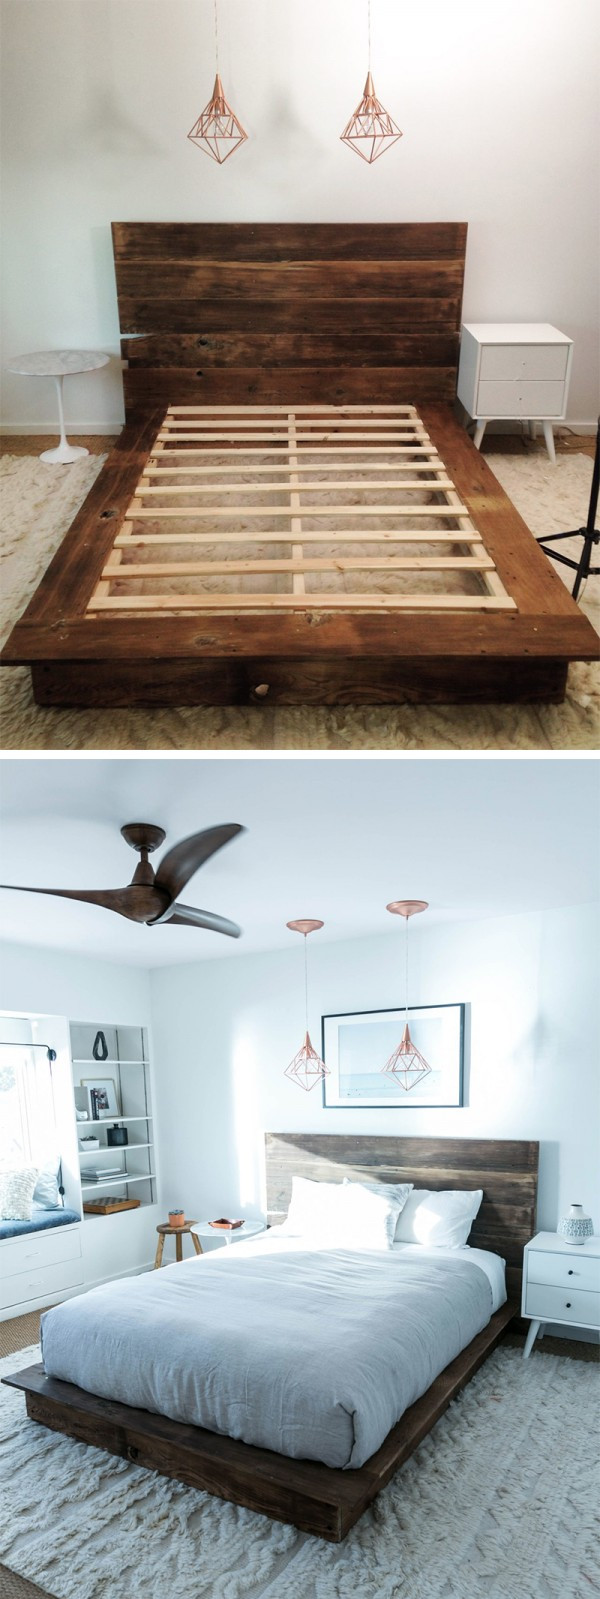 DIY Wooden Bed Platform
 45 Easy DIY Bed Frame Projects You Can Build on a Bud